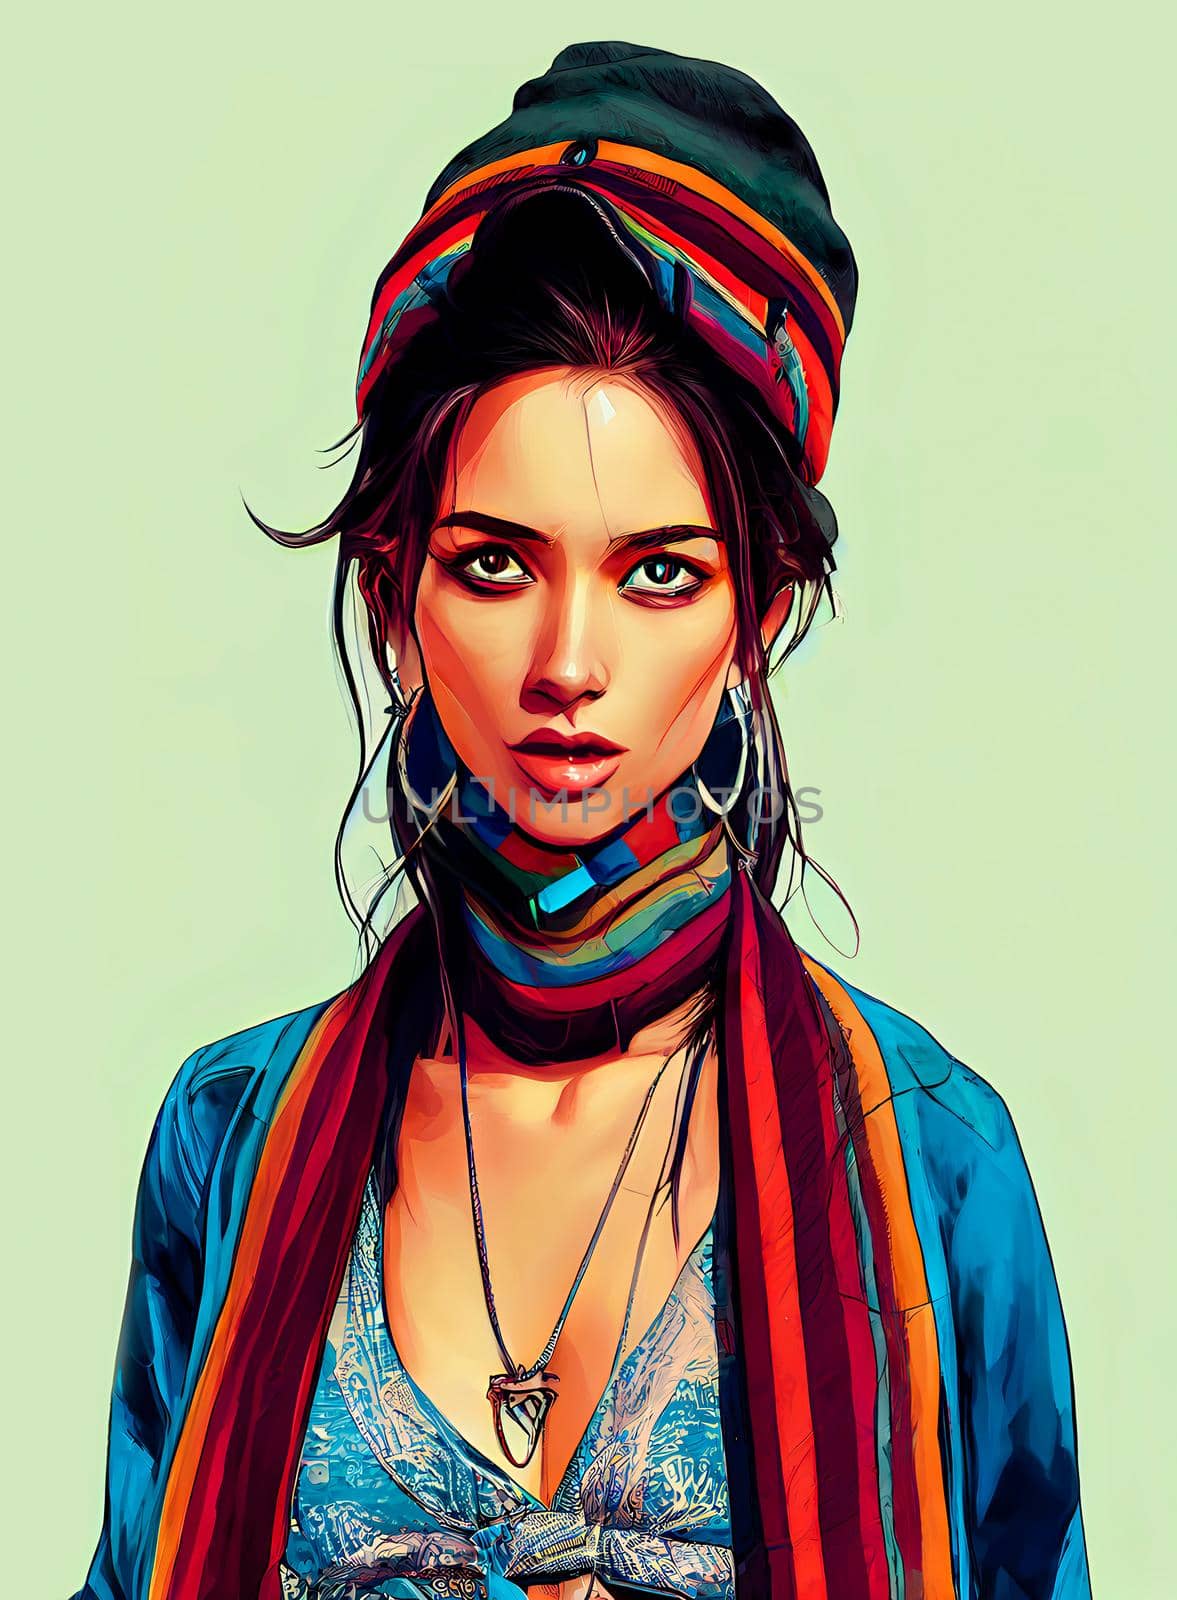 Urban fashion mexican female model wearing colorful hat and scarf. Digital illustration